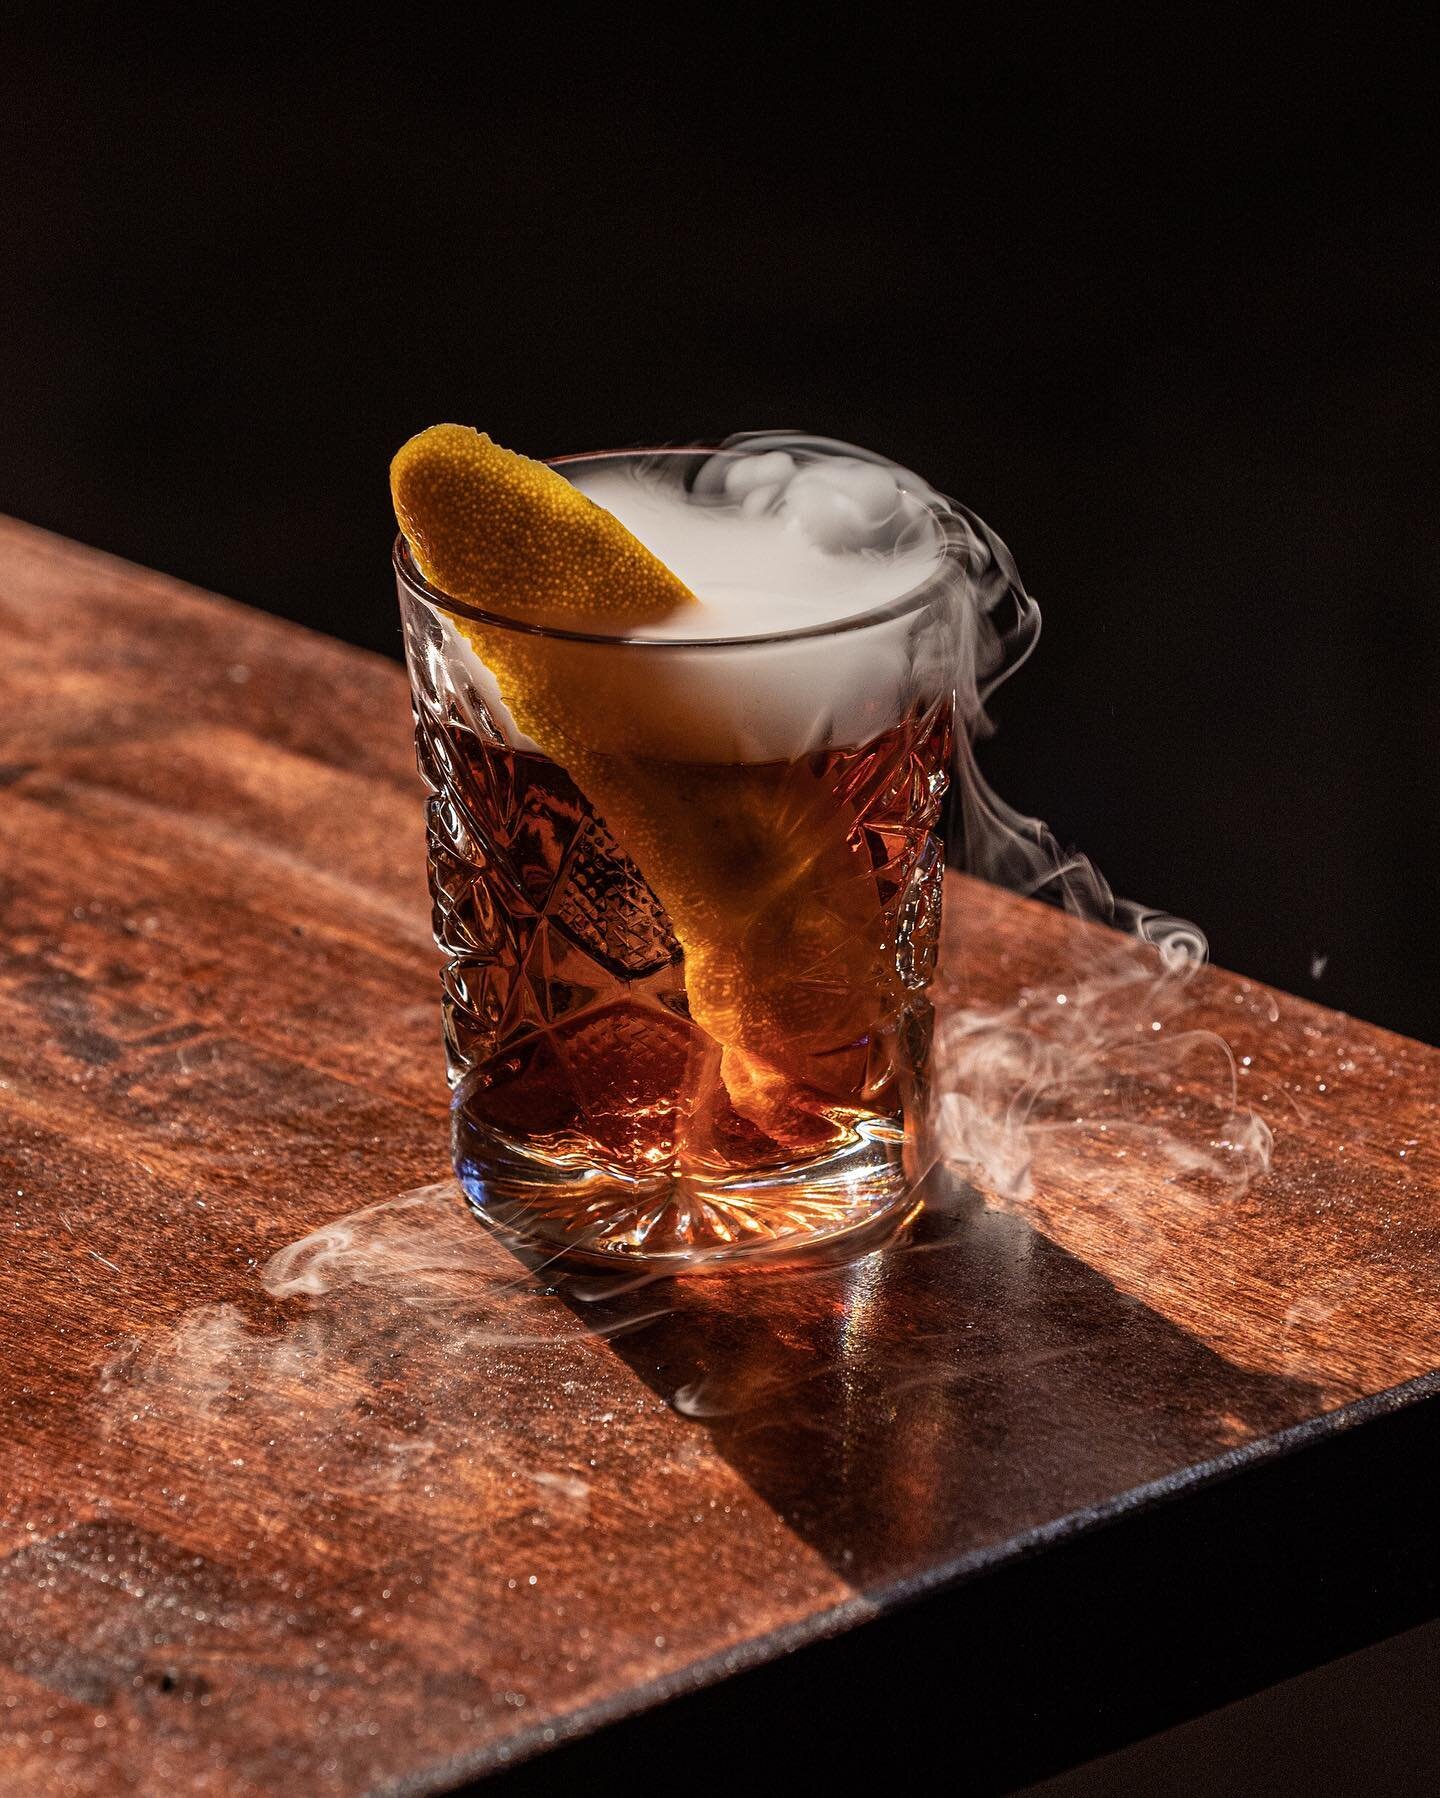 Who says an Old Fashioned has to feel old fashioned?